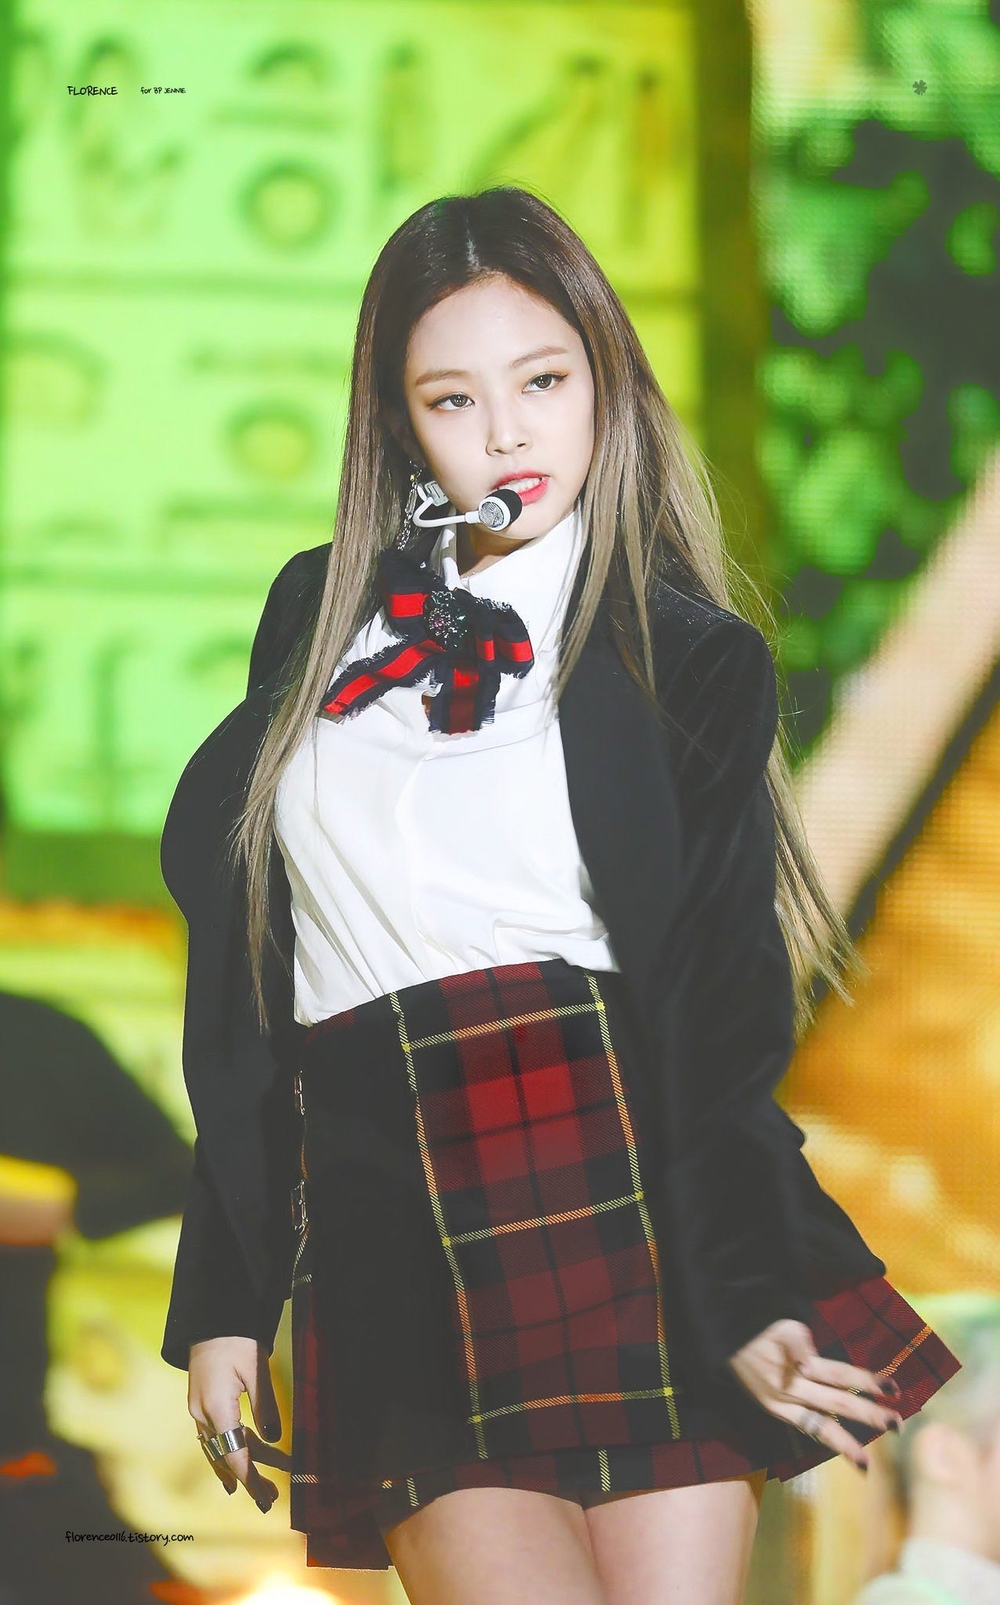  Yeri and Jennie once had a clash when they both chose Gucci's bow tie. While Yeri mixed a shirt with a pink and red skirt, Jennie mixed with a luxurious black velvet jacket and tartan skirt. That's why Jennie's style looks classy many times.